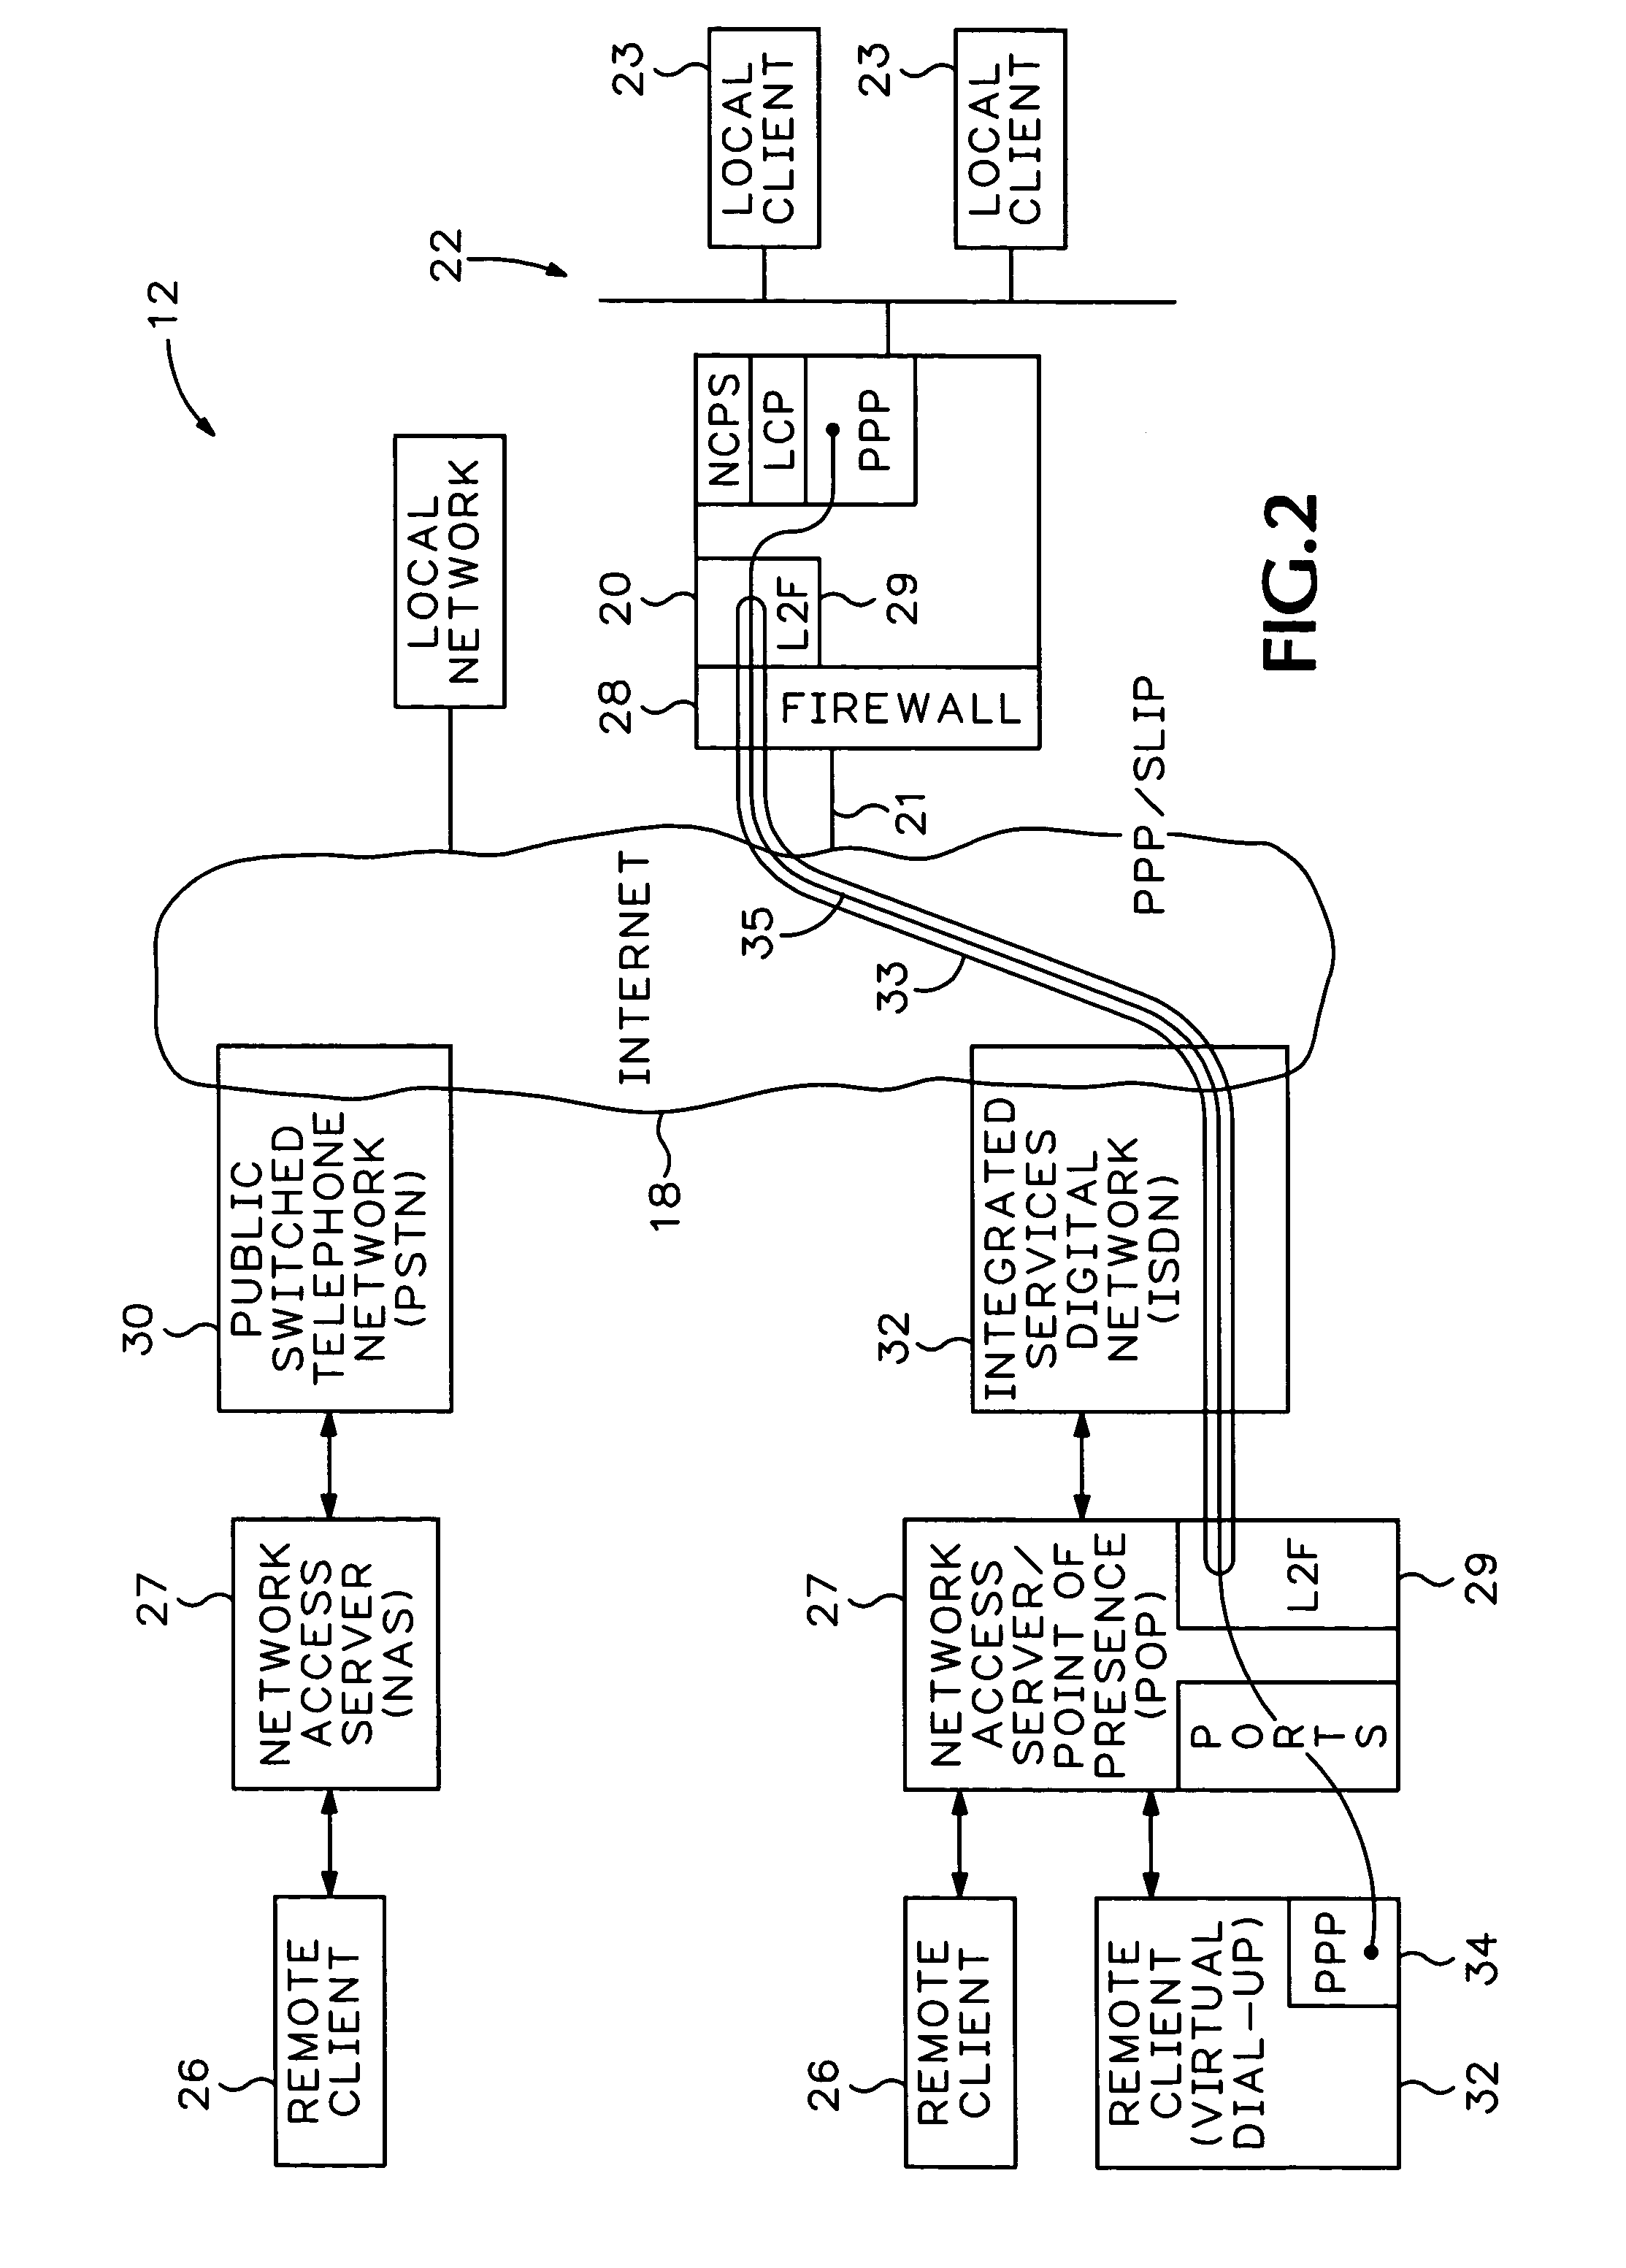 Virtual dial-up protocol for network communication